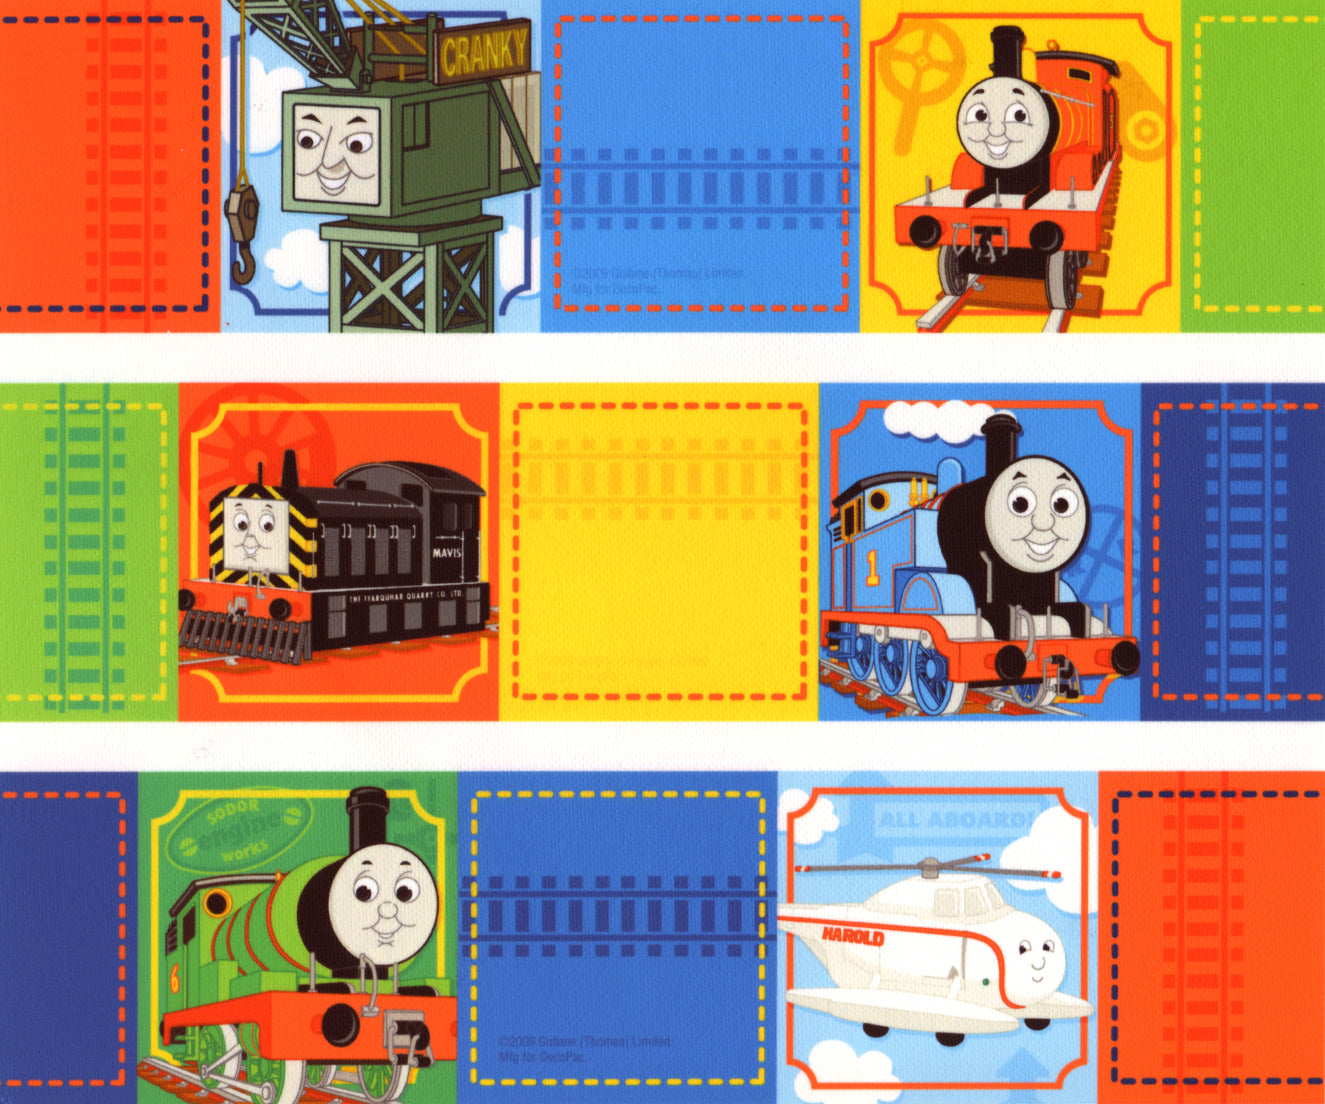 Thomas and Friends Percy Gordon James Cranky and Harold Edible Cake Topper Image Strips ABPID07497